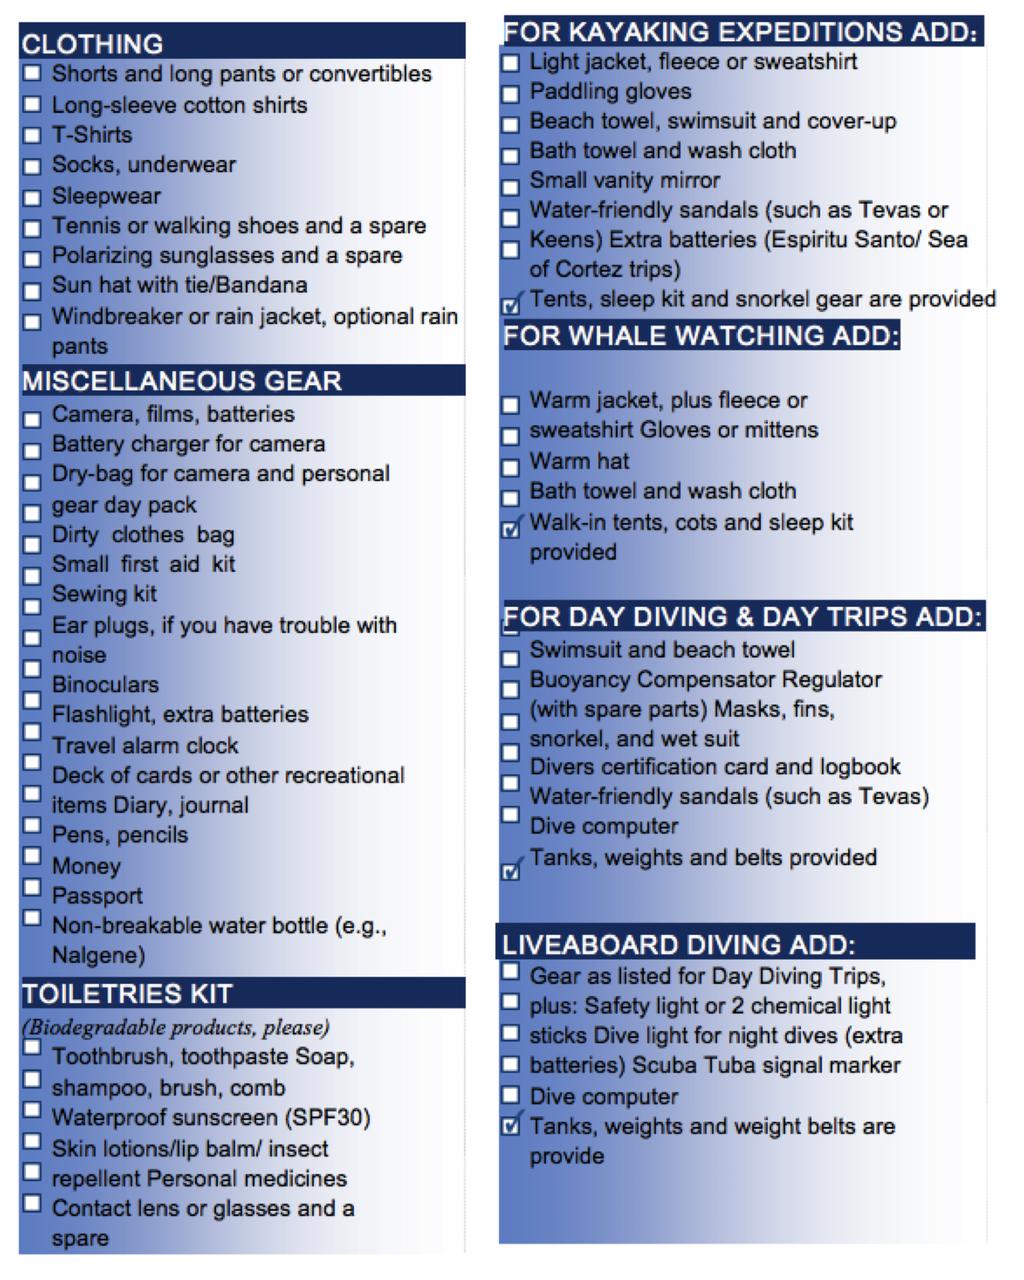 PACKING AND PERSONAL EQUIPMENT CHECKLIST We suggest that you pack your belongings in a water-resistant, collapsible duffle bag and use this checklist as a guideline when packing.